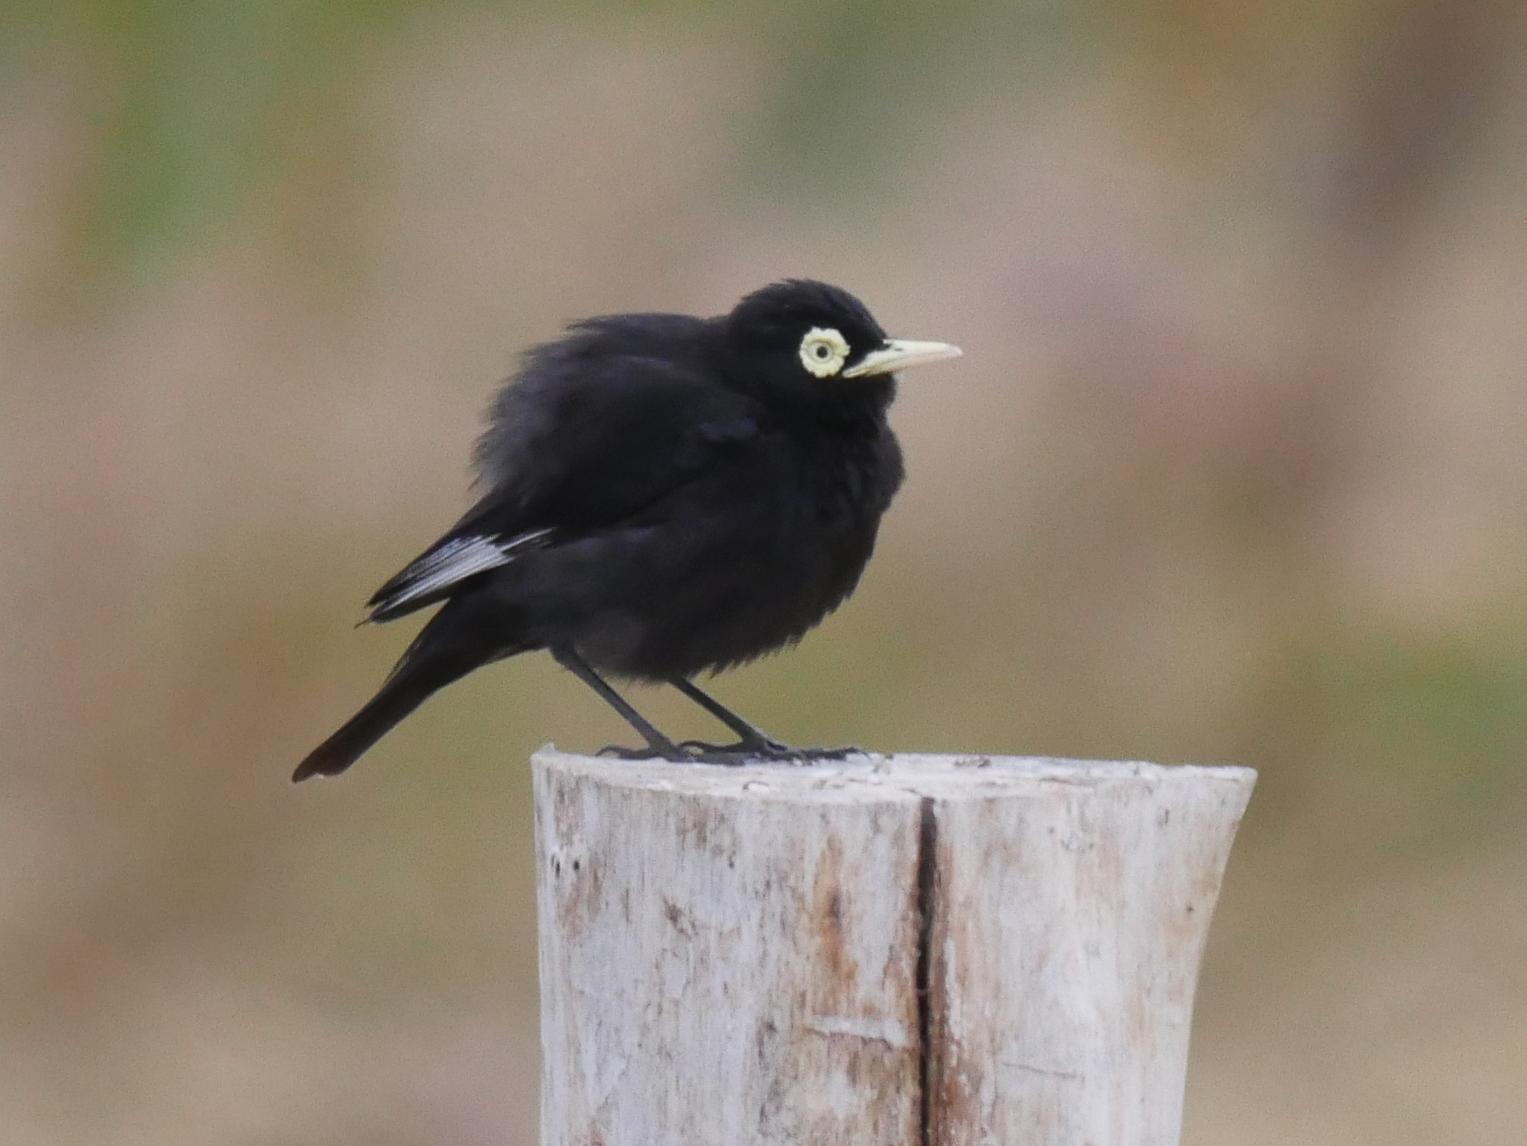 Spectacled Tyrant Photo by Peter Lowe